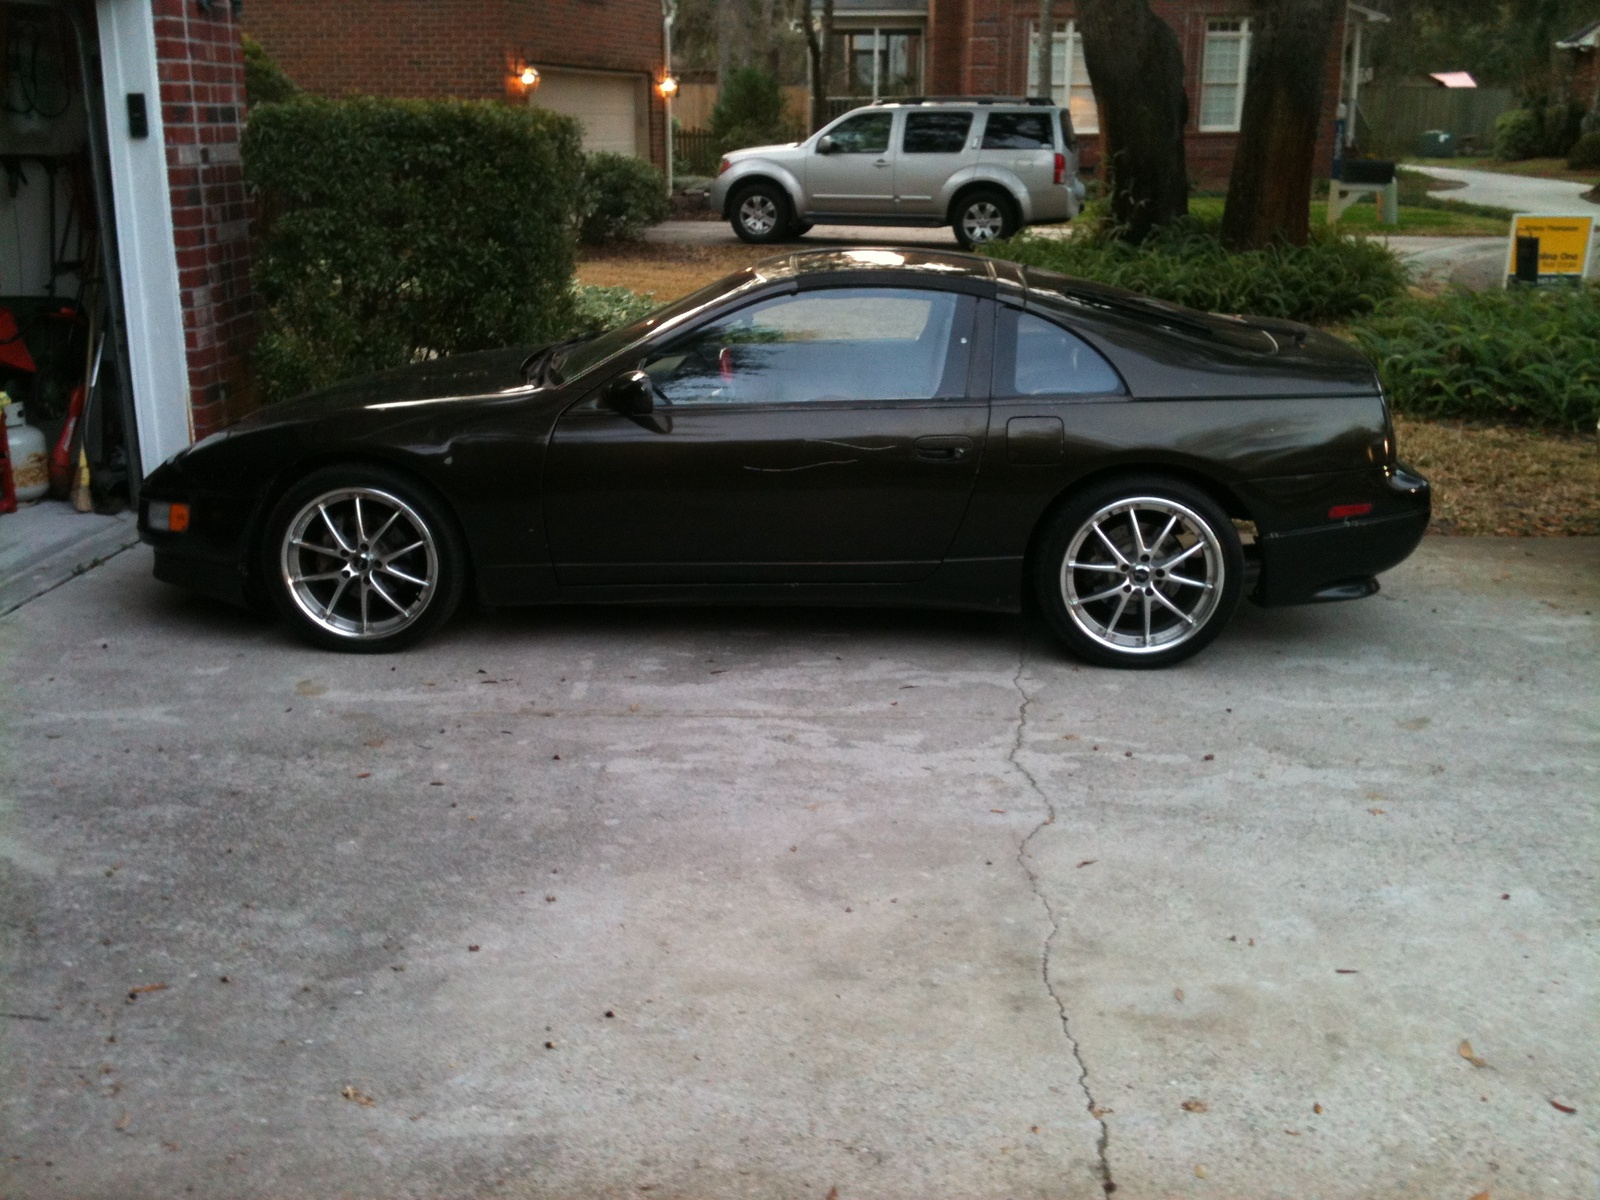 Nissan 300zx security #2